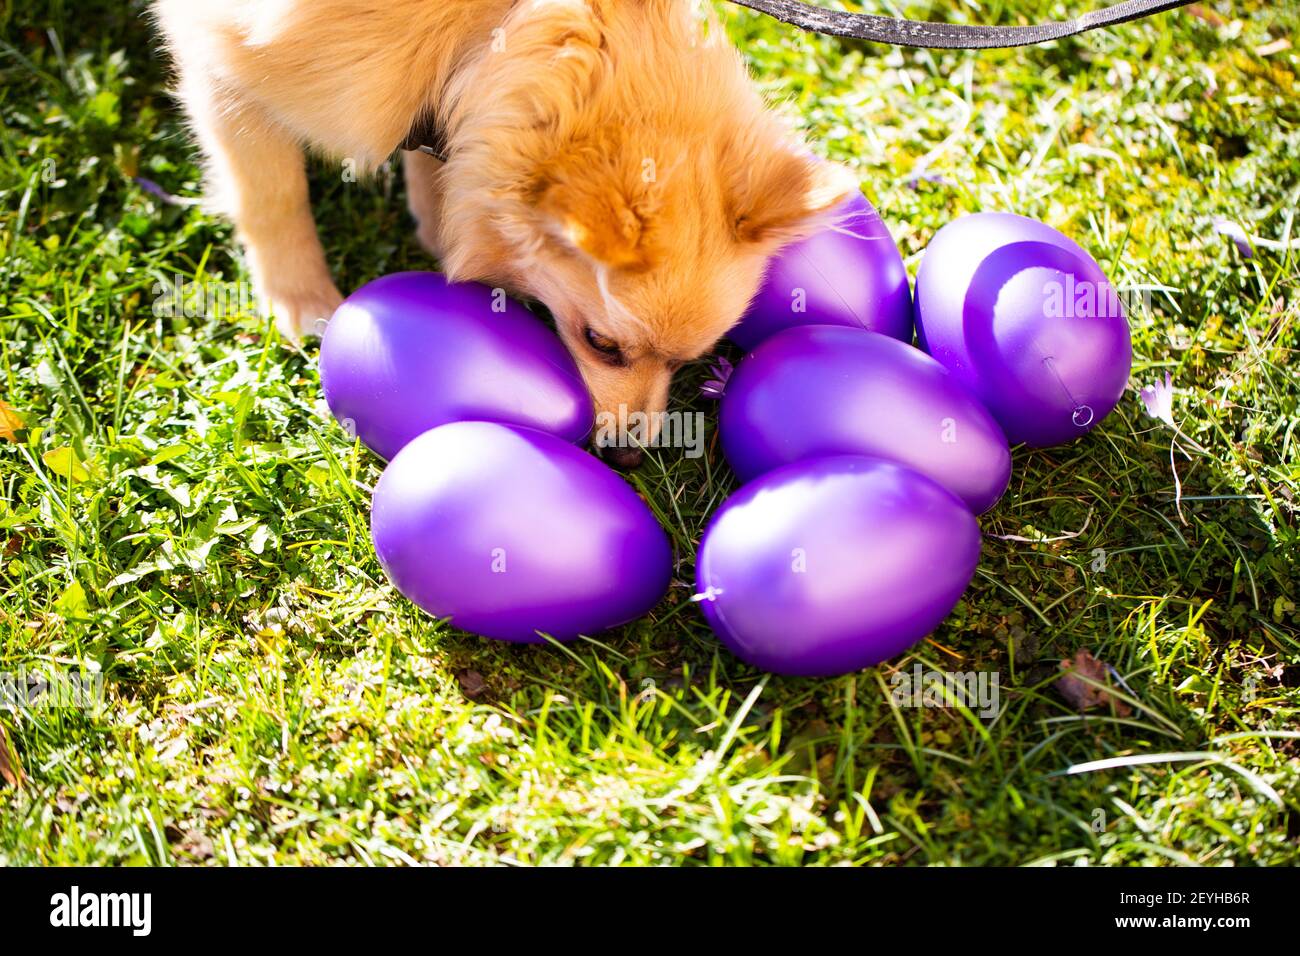 Miniature Spitz with Easter eggs, purple Easter eggs with a dog Stock Photo